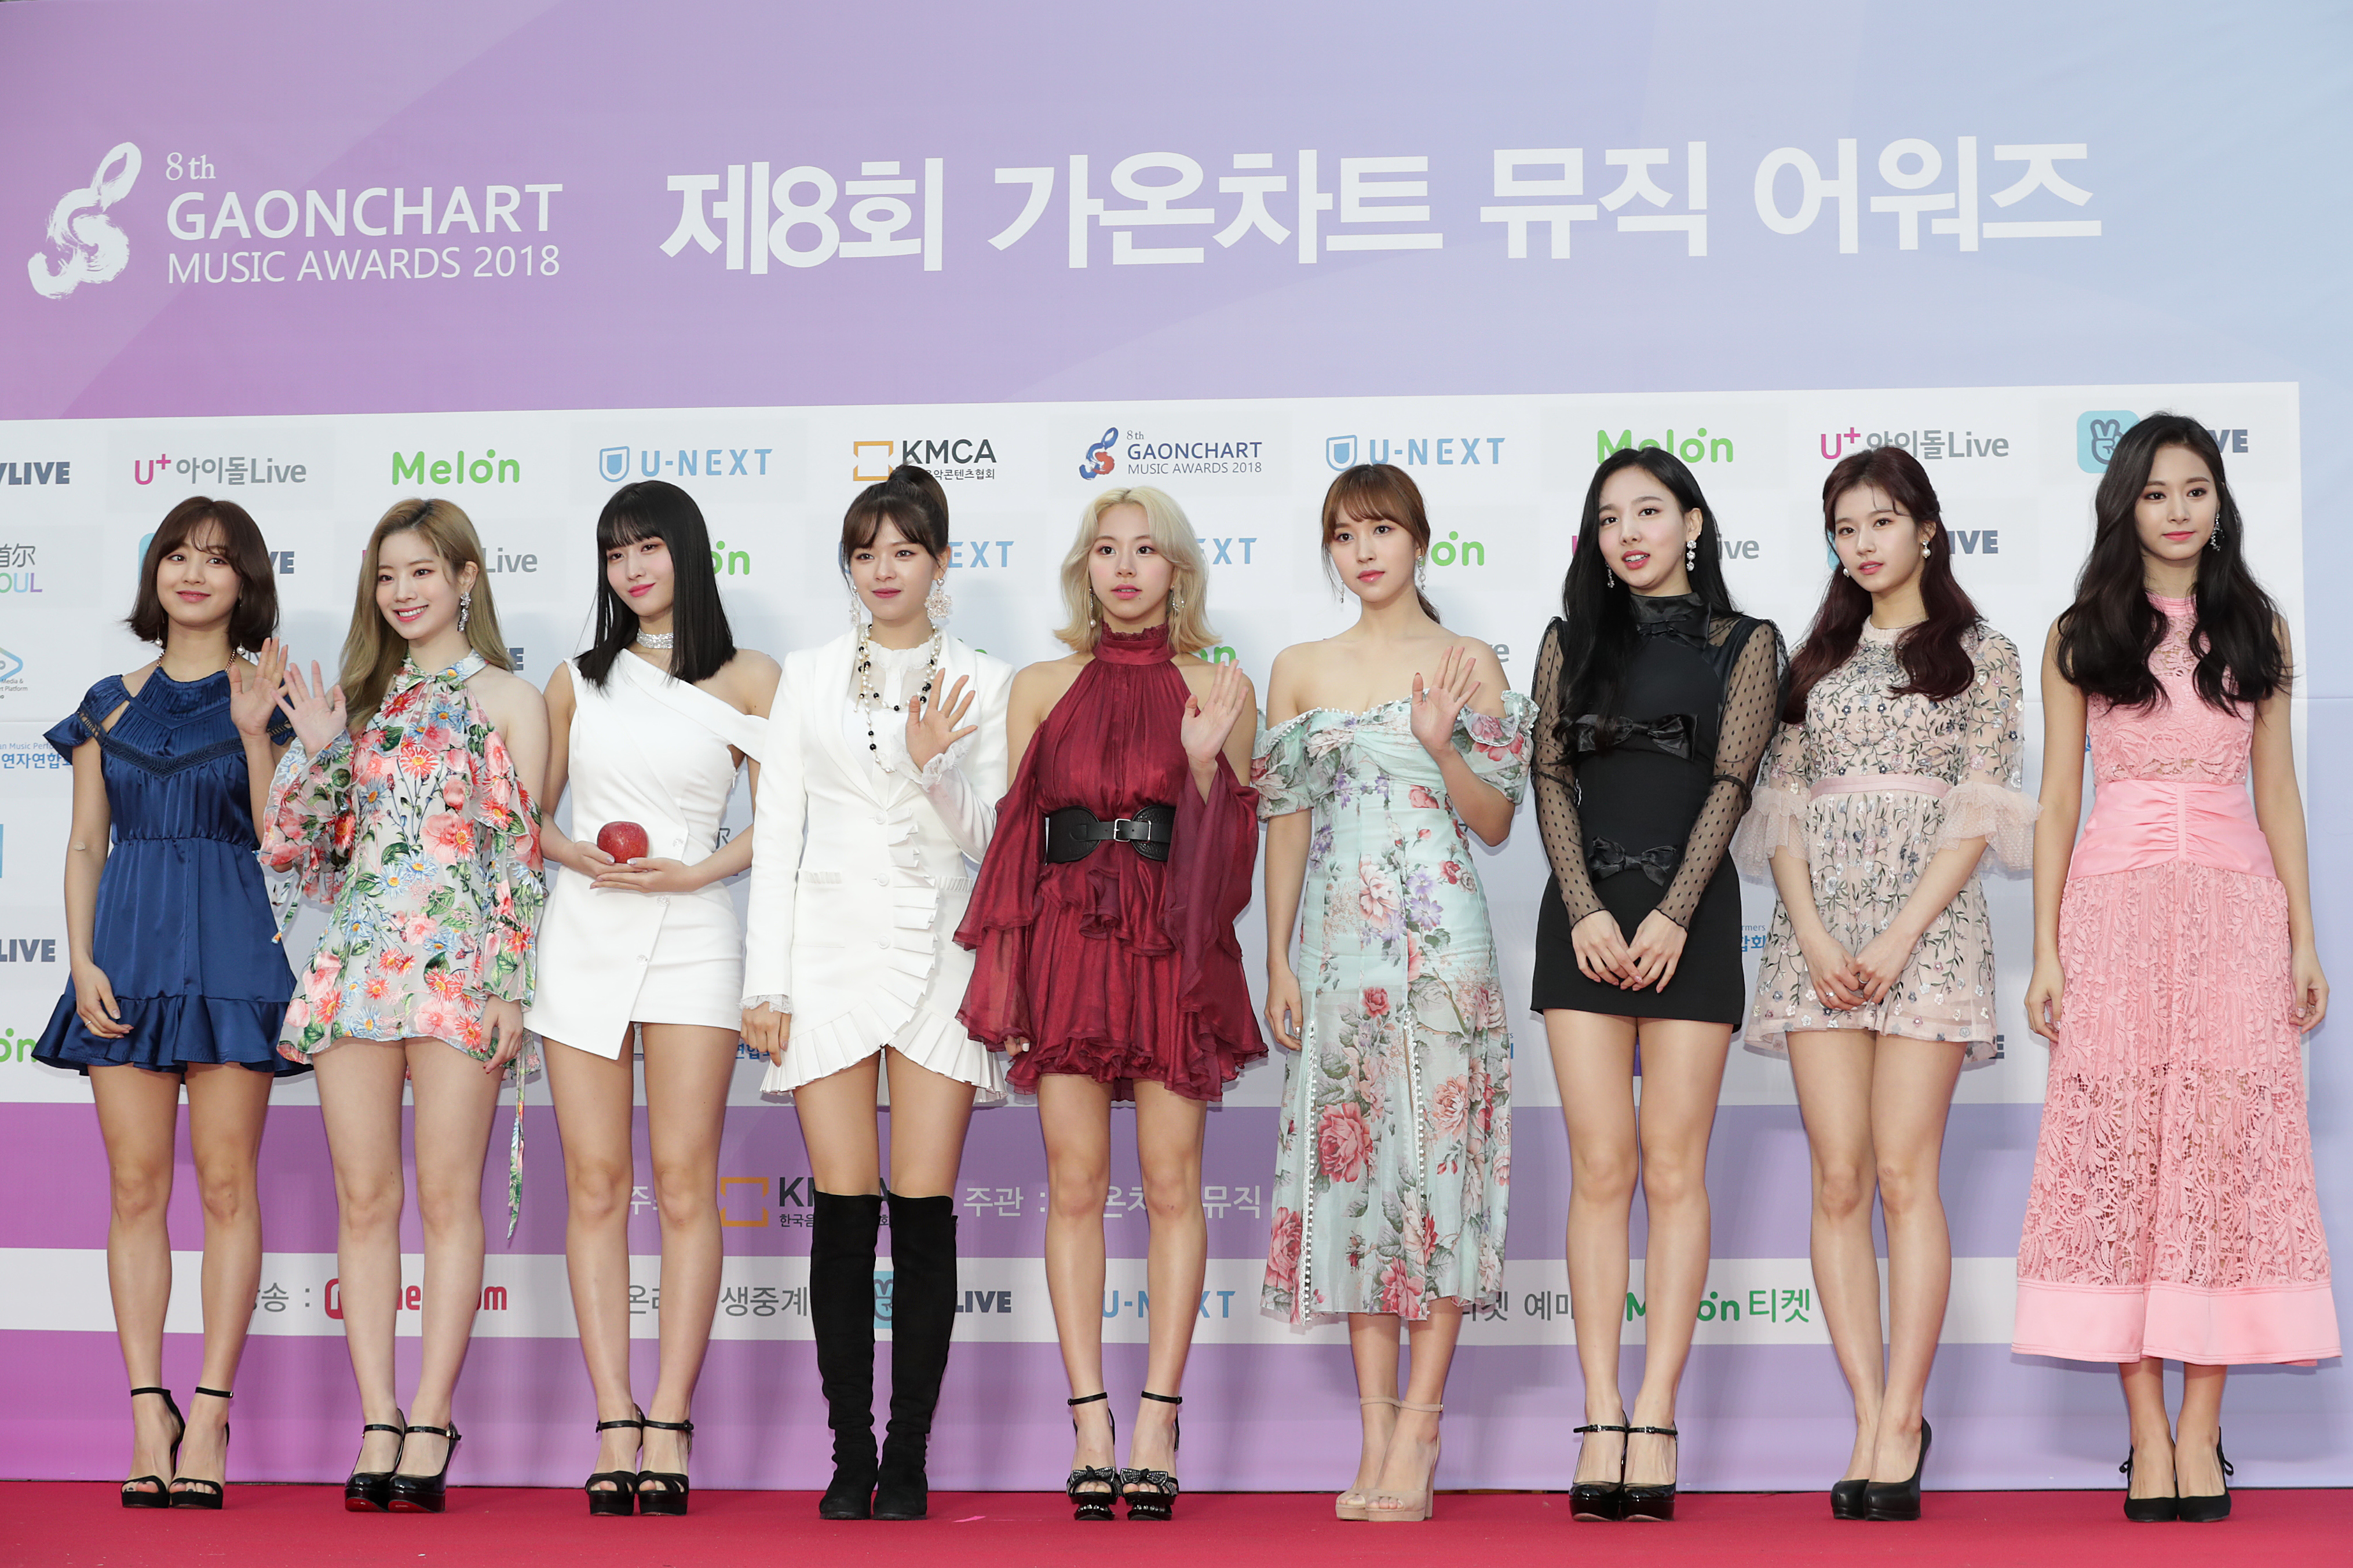 TWICE returns with new album 'Ready To Be' and 'Set Me Free' music